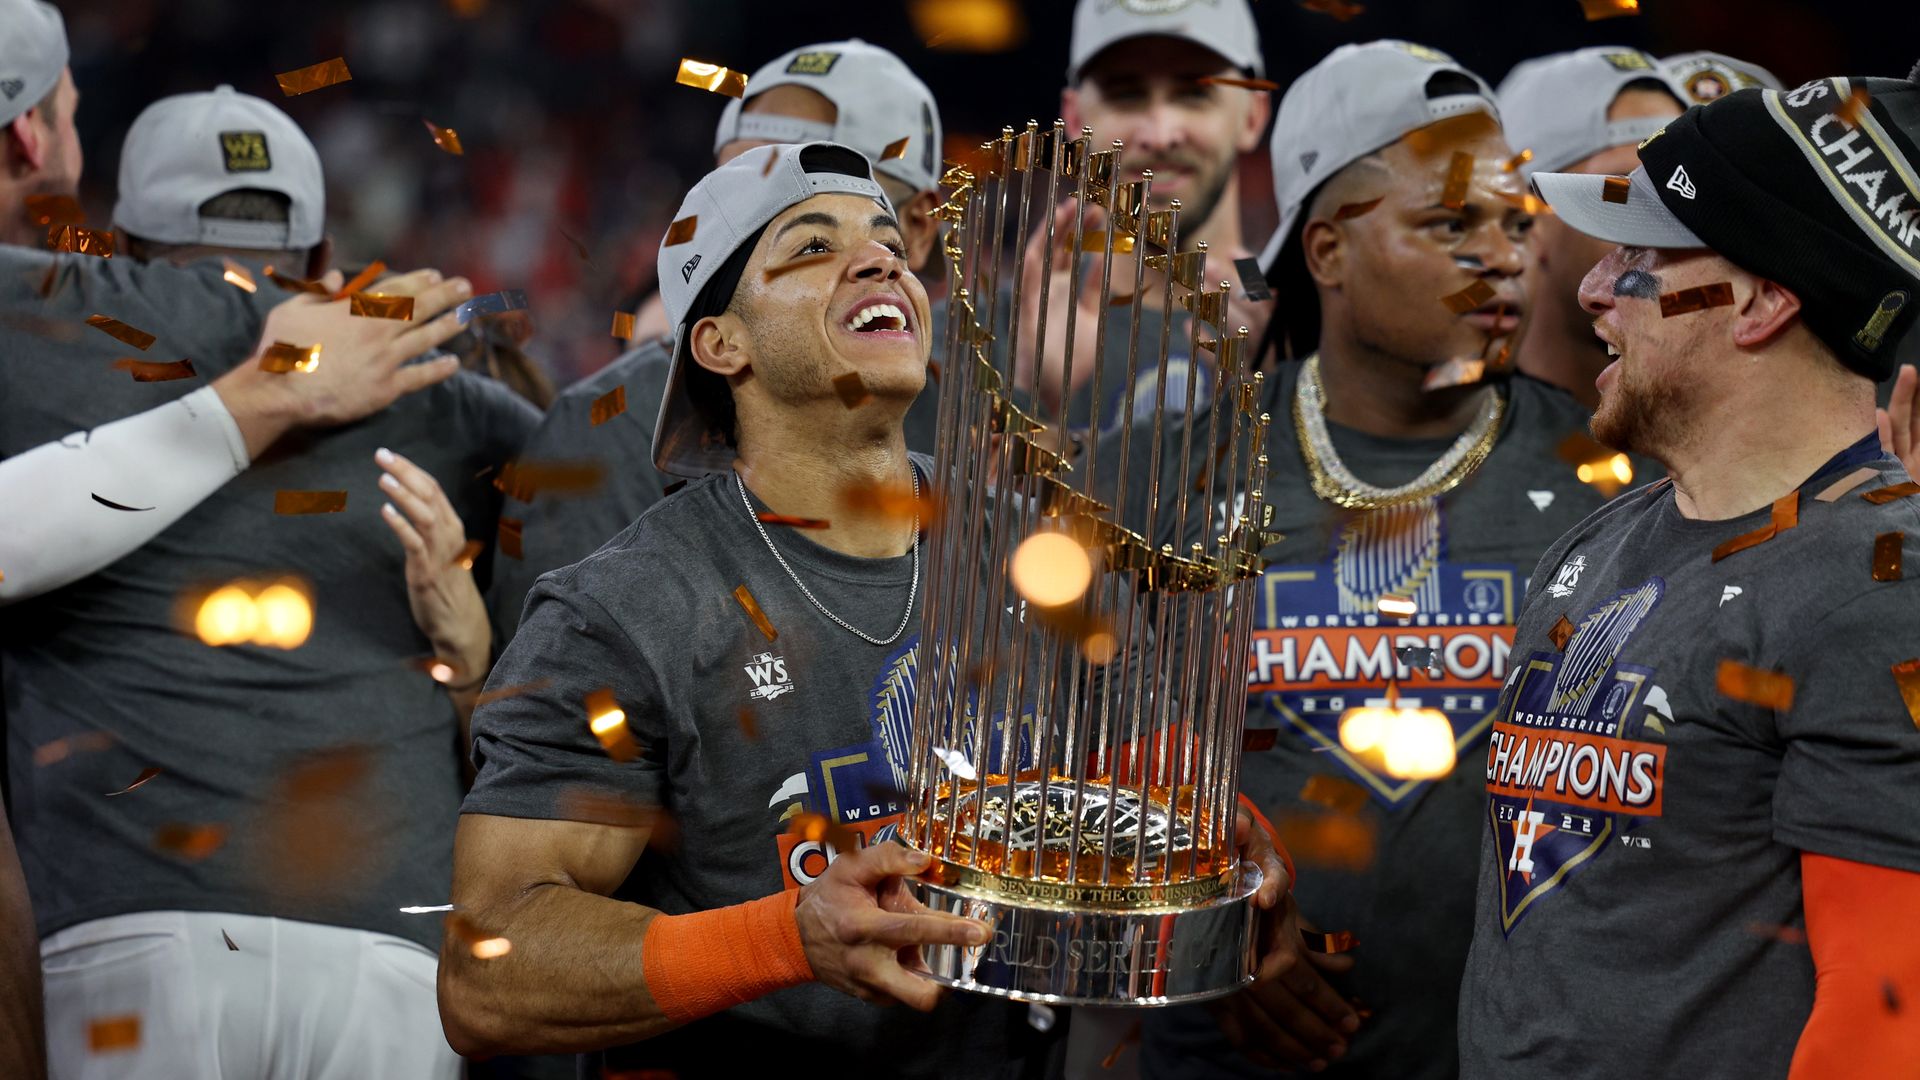 Astros shortstop and World Series MVP Jeremy Peña hoists the Commissioners Trophy midfield as confetti rains down after the Astros won the World Series